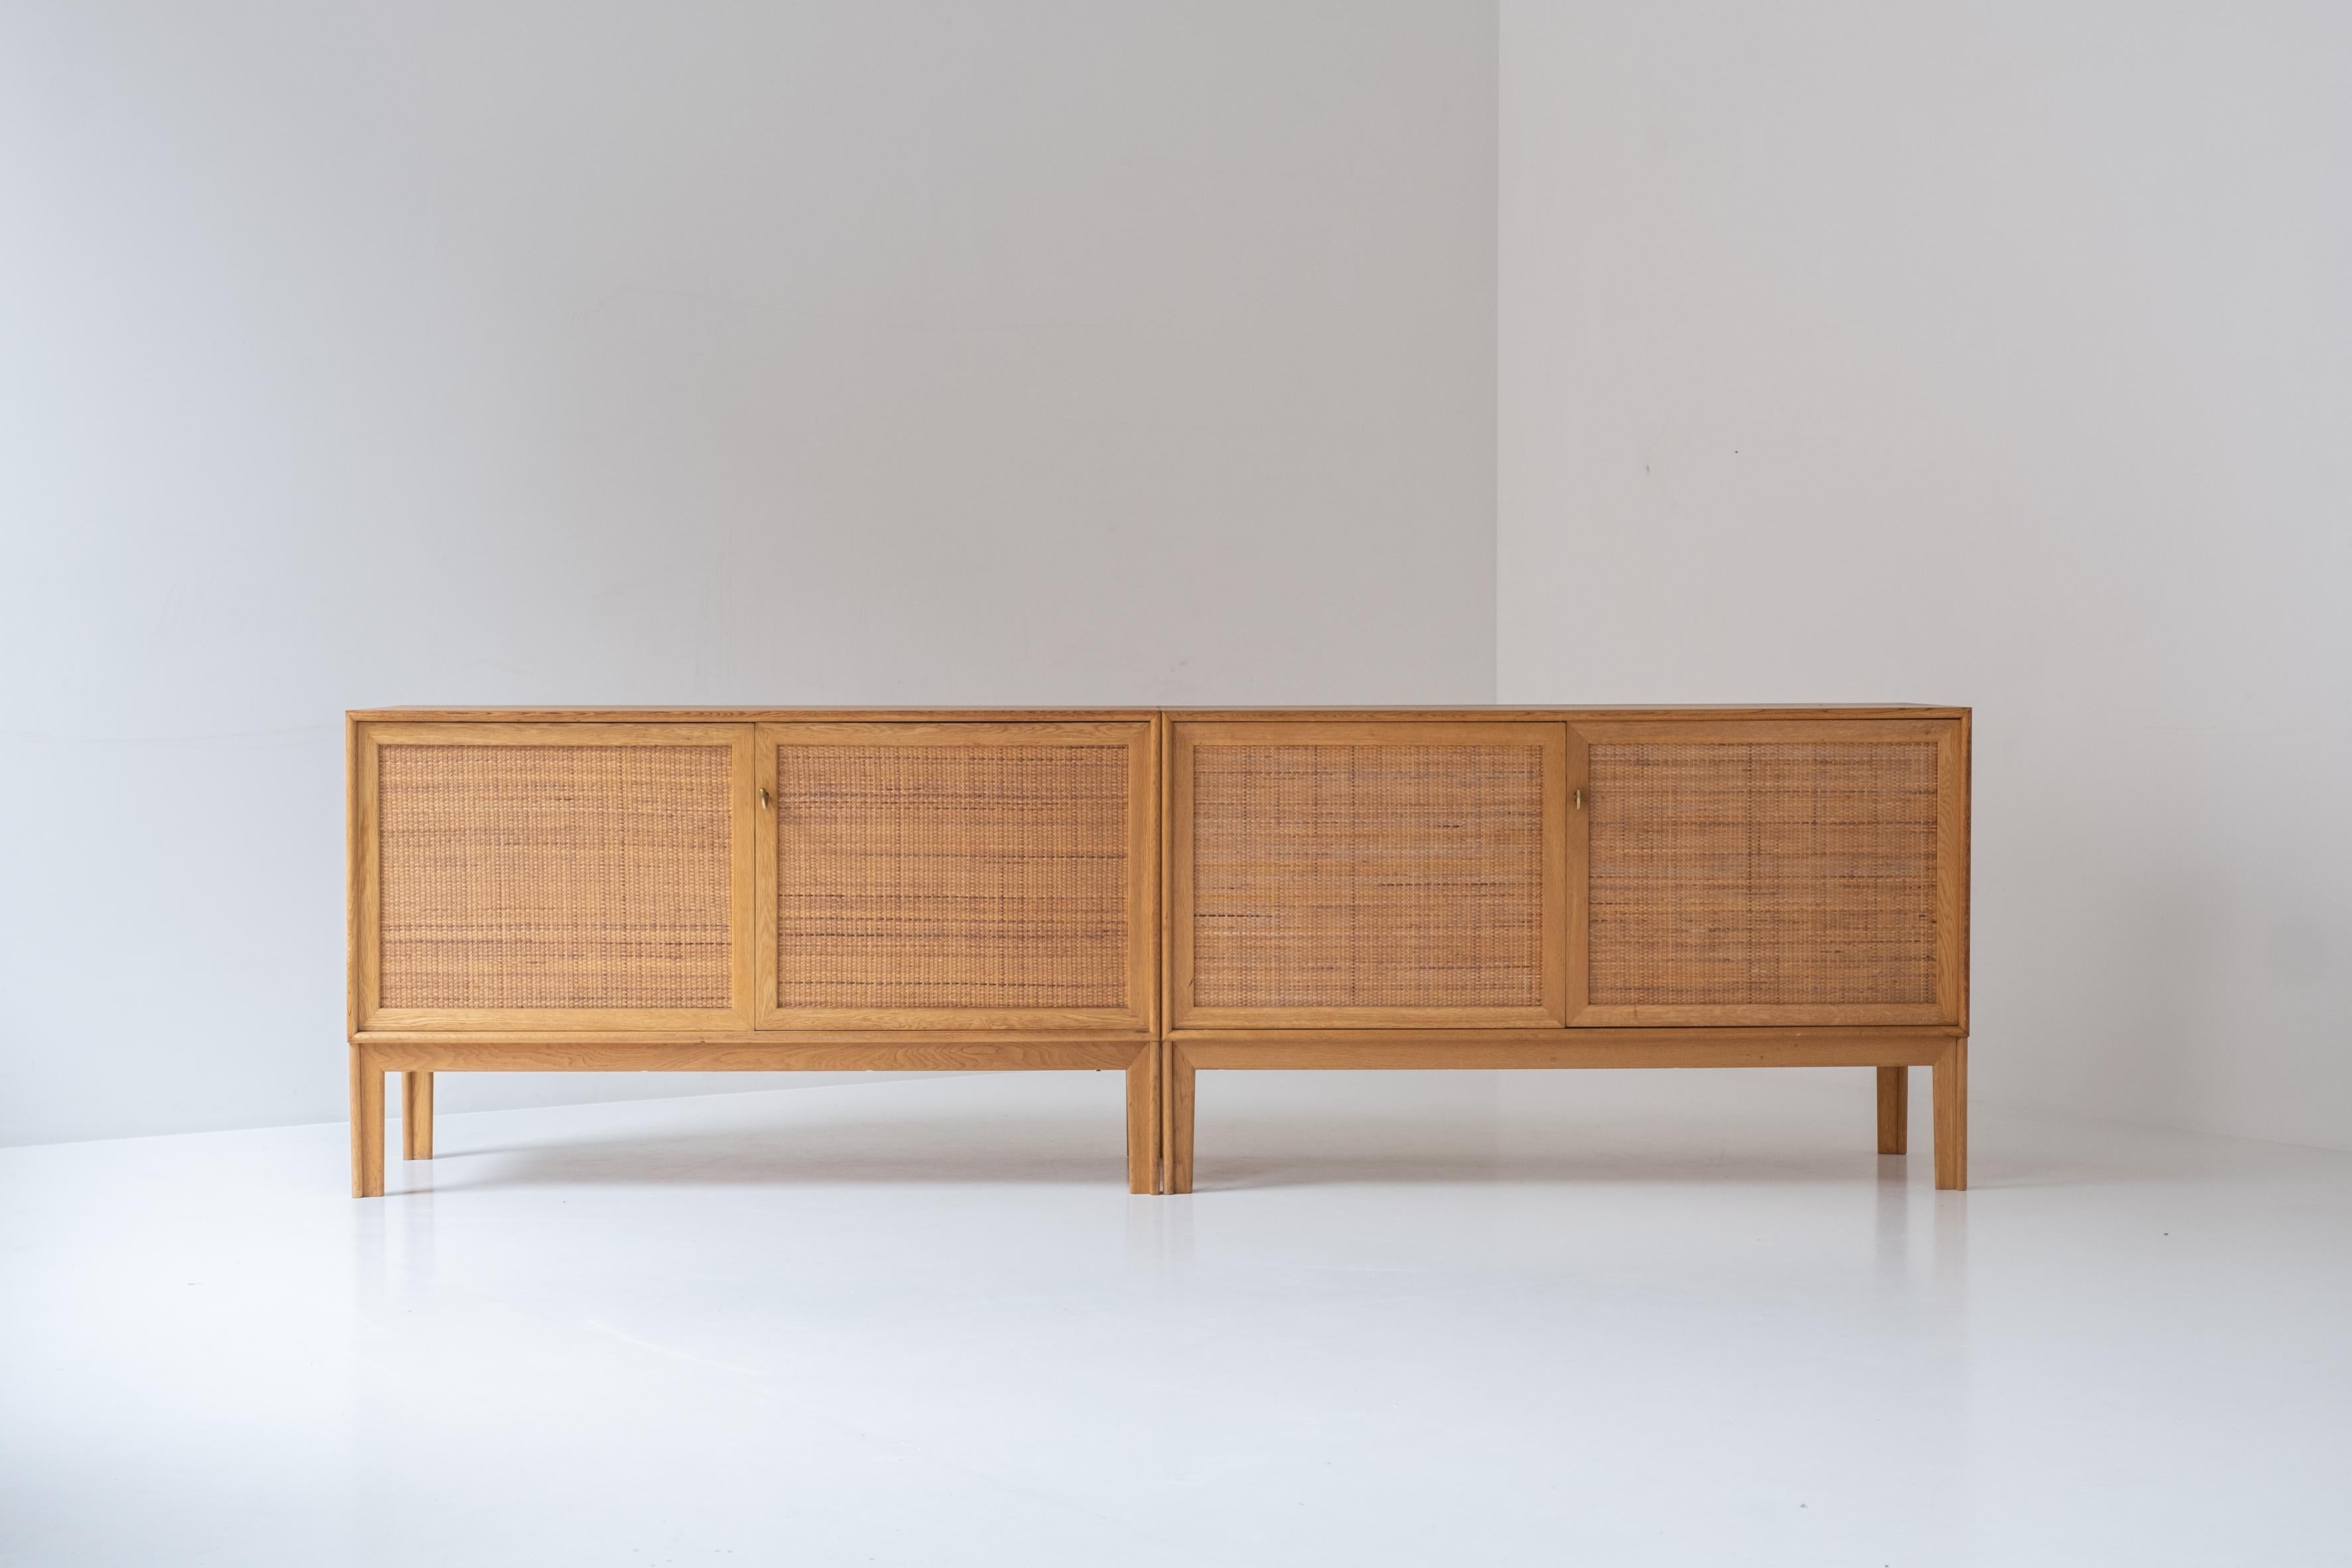 Sideboard, model Norrland, by Alf Svensson for Bjästa Möbelfabrik, Sweden 1960s. This sideboard consists of 2 smaller cabinets made out of oak and rattan. One sideboard contains several adjustable shelves, and the other features a combination of